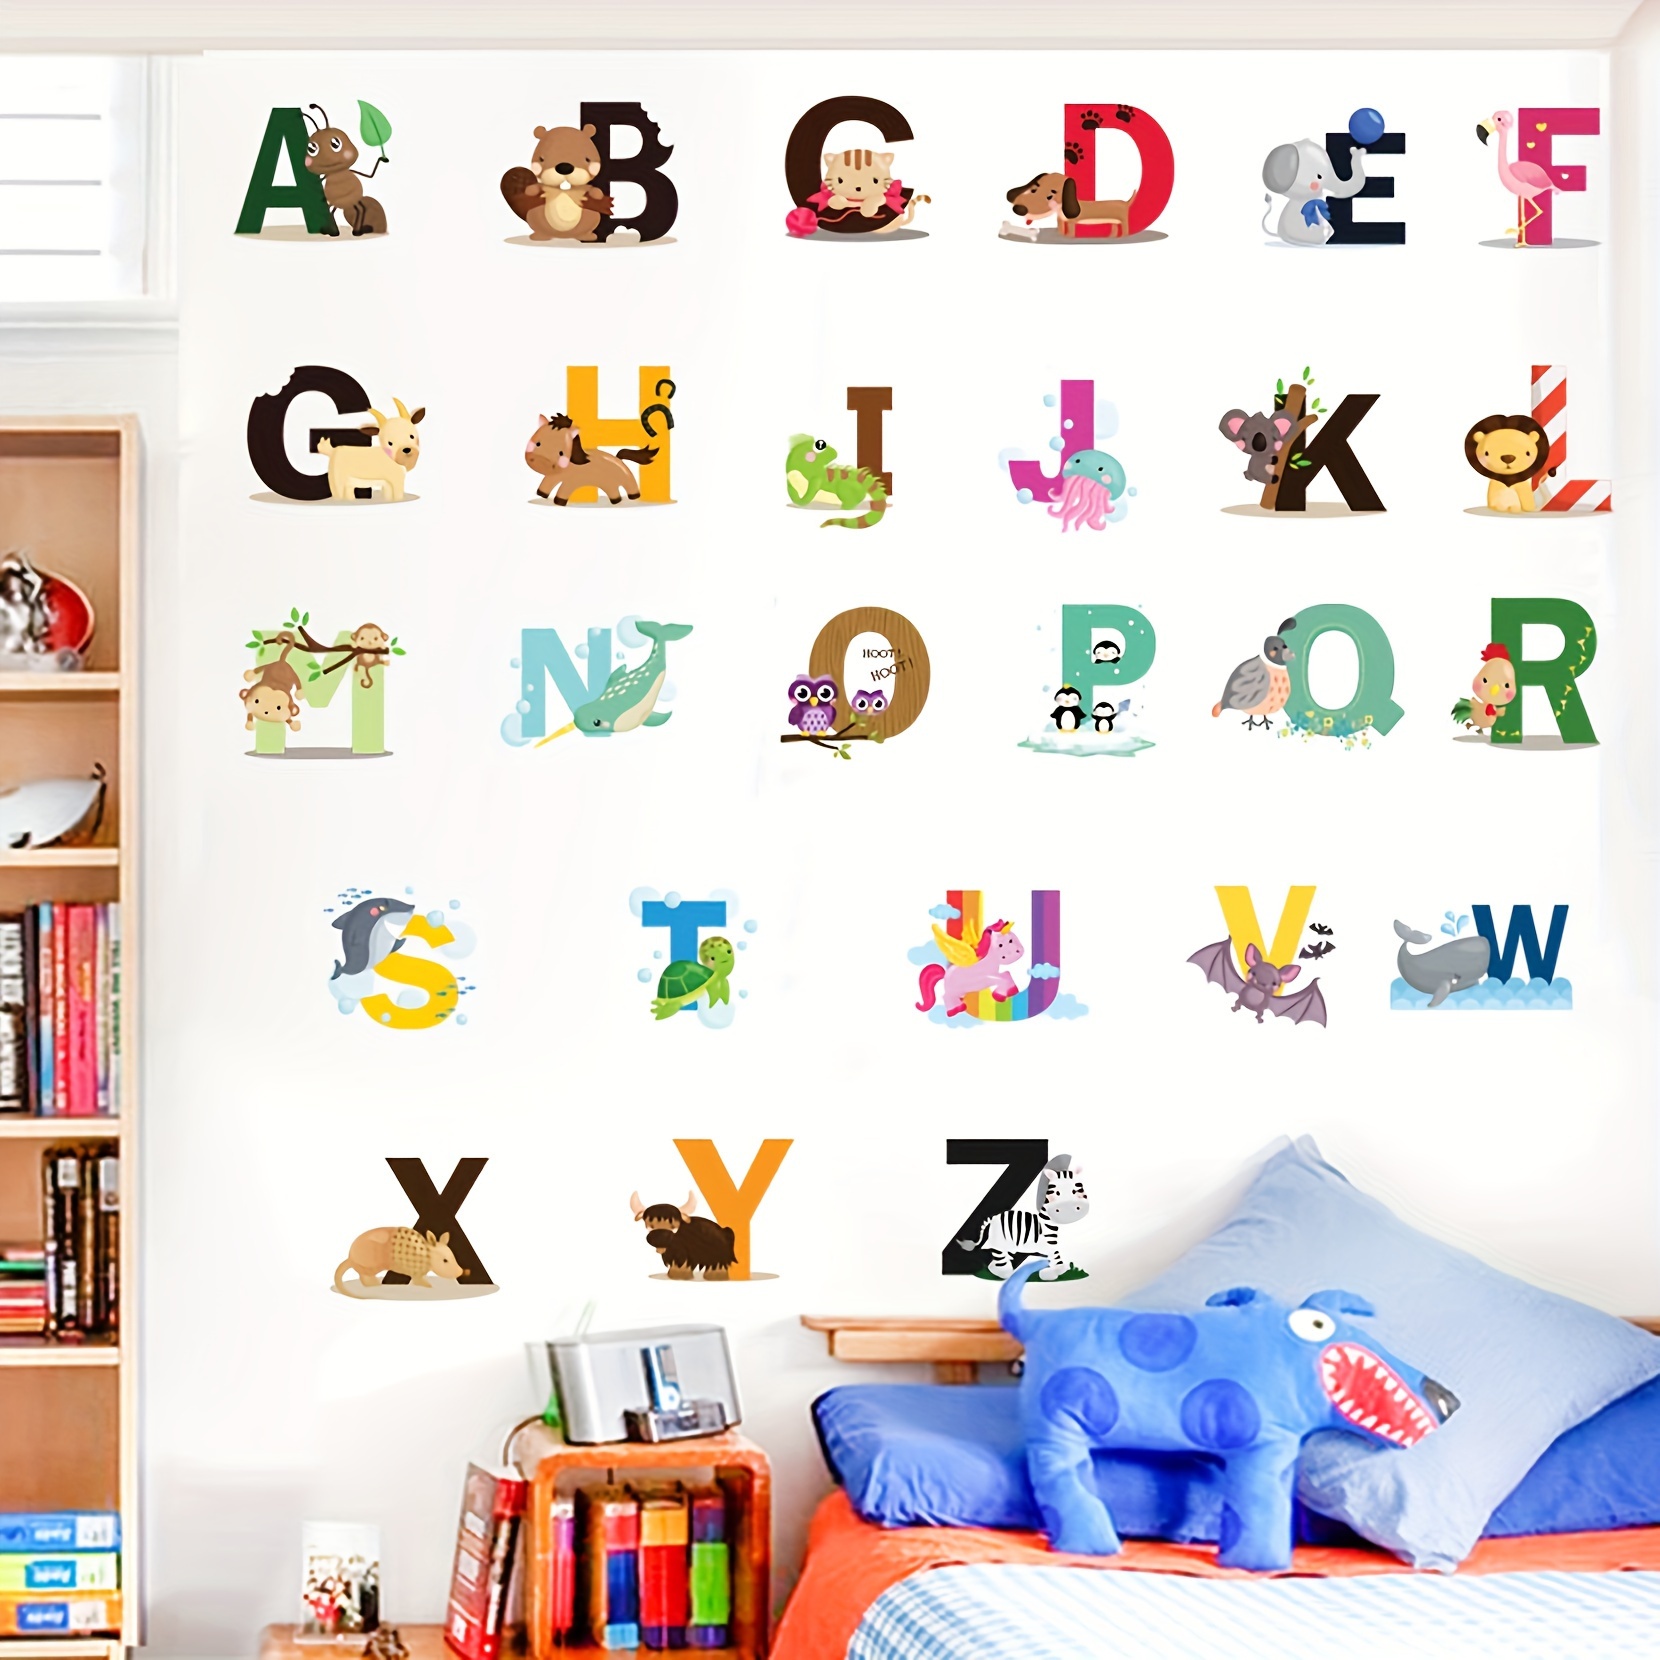 

Peel & Stick Alphabet Wall Decals - Removable Animal Abc Vinyl Stickers For Bedroom, Living Room, And Playroom Decor